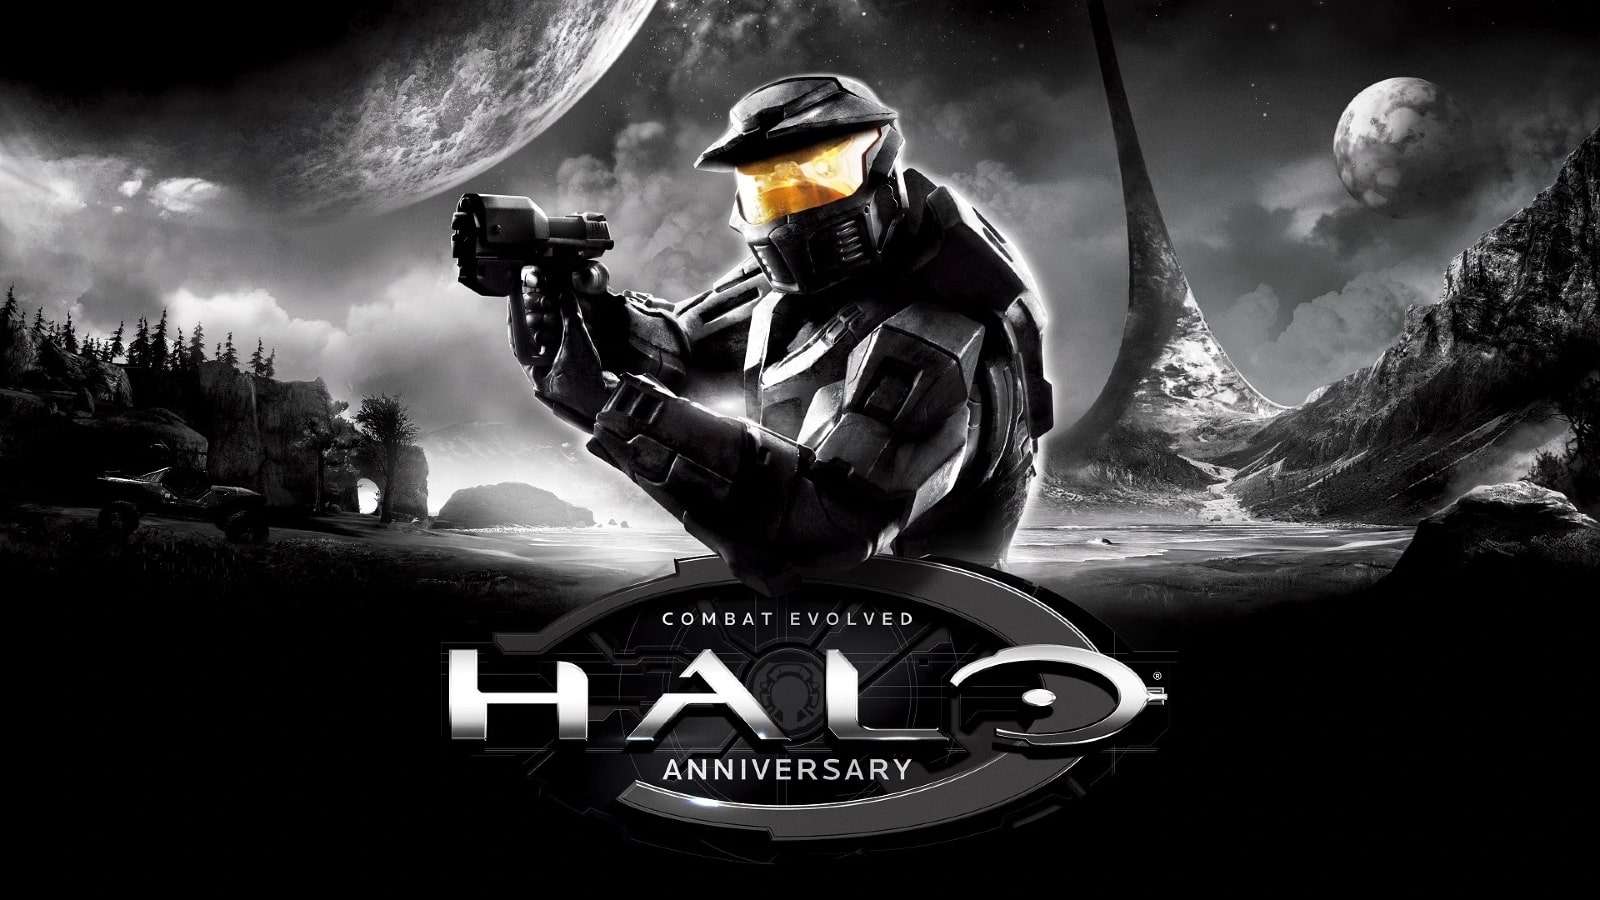 The Evolution of Master Chief from Halo: Combat Evolved to Halo